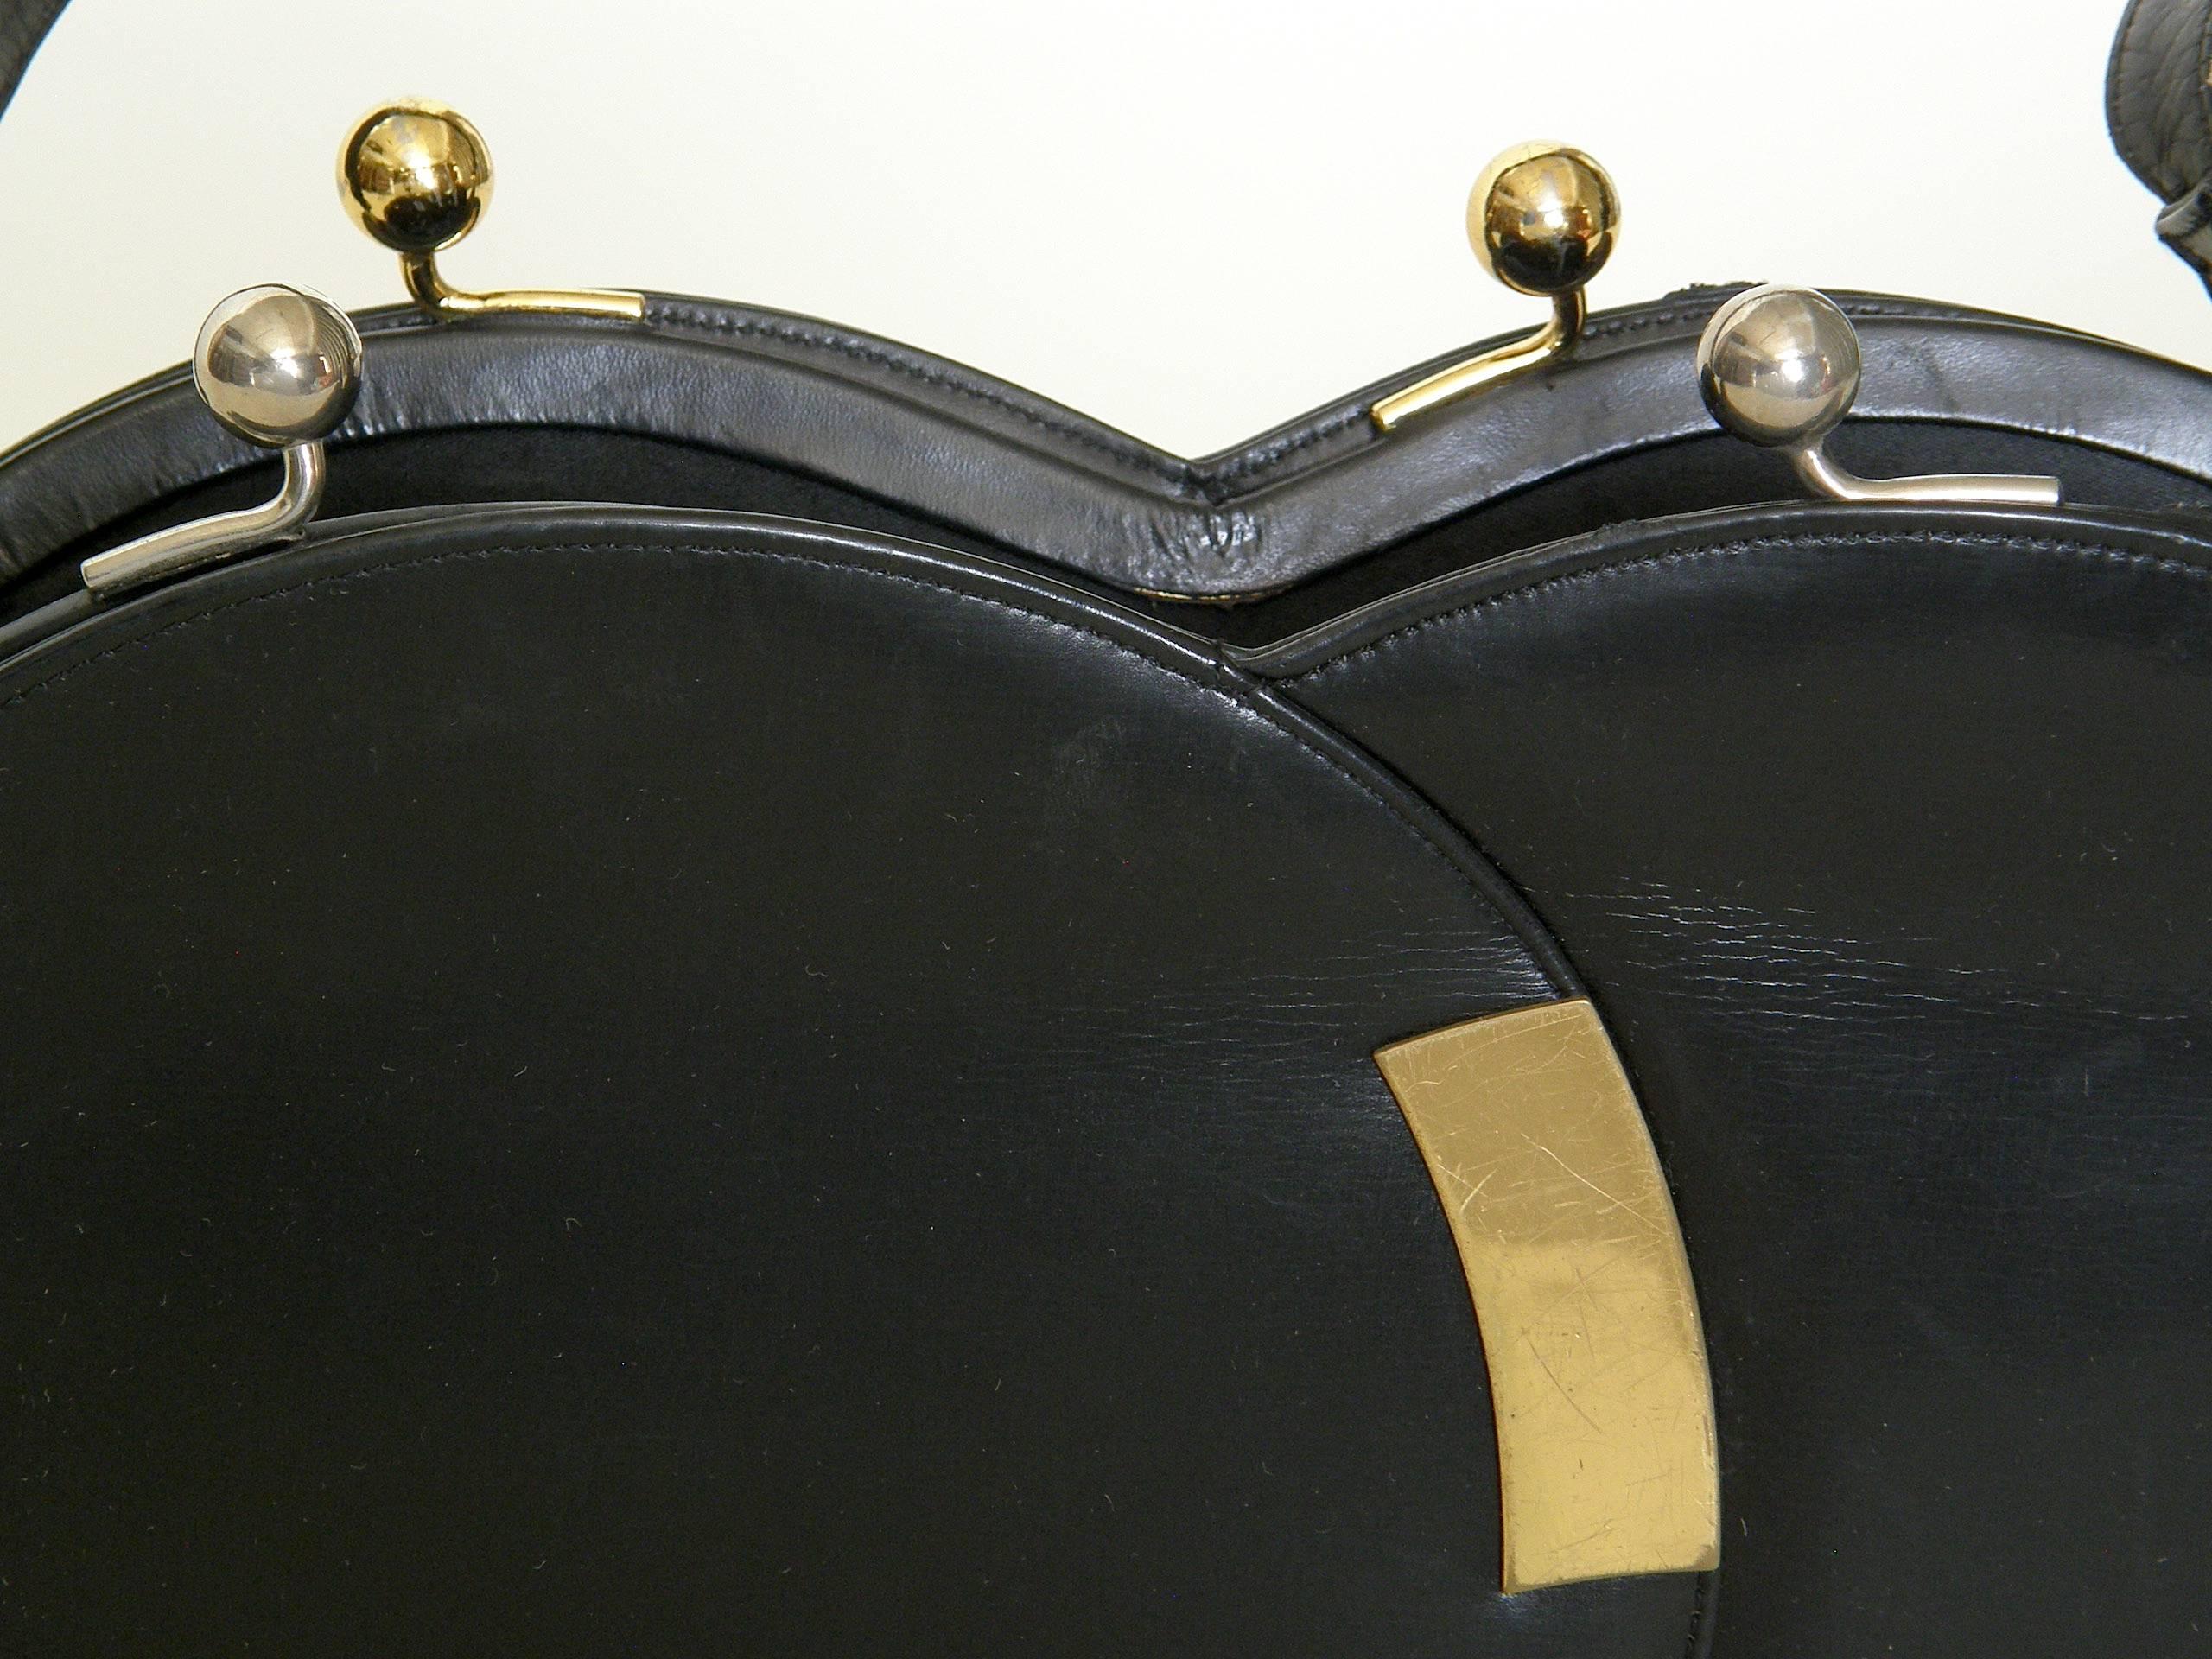 Koret Black Leather Handbag with Double Bubbles Shape and Kiss Lock Clasps 2